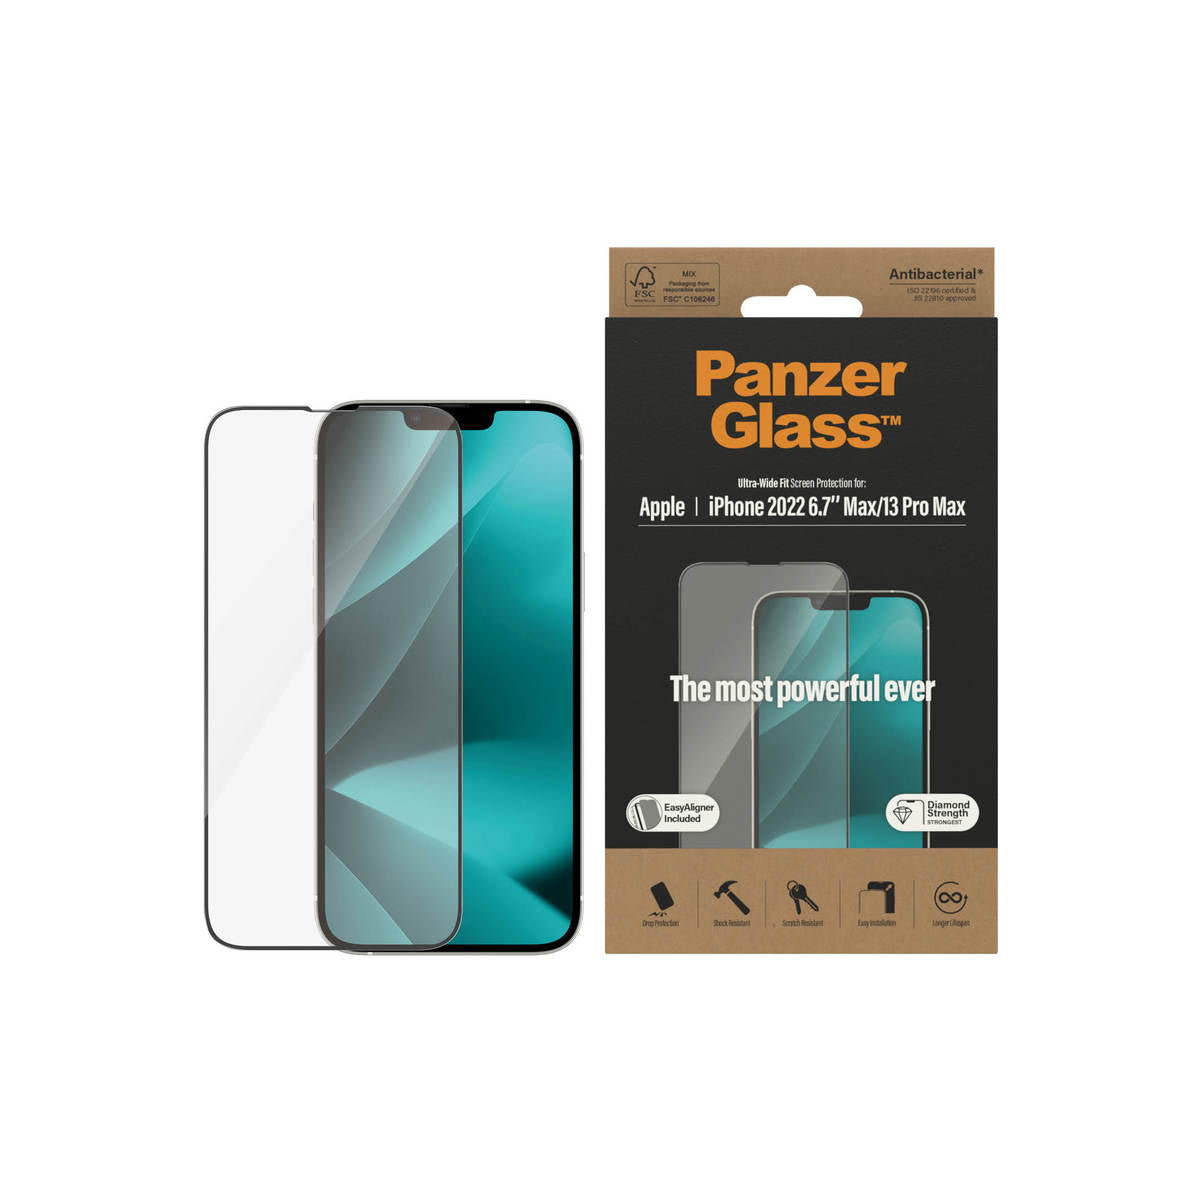 PanzerGlass Ultra-Wide Fit Antibacterial Screen Protector for iPhone 14 Plus.